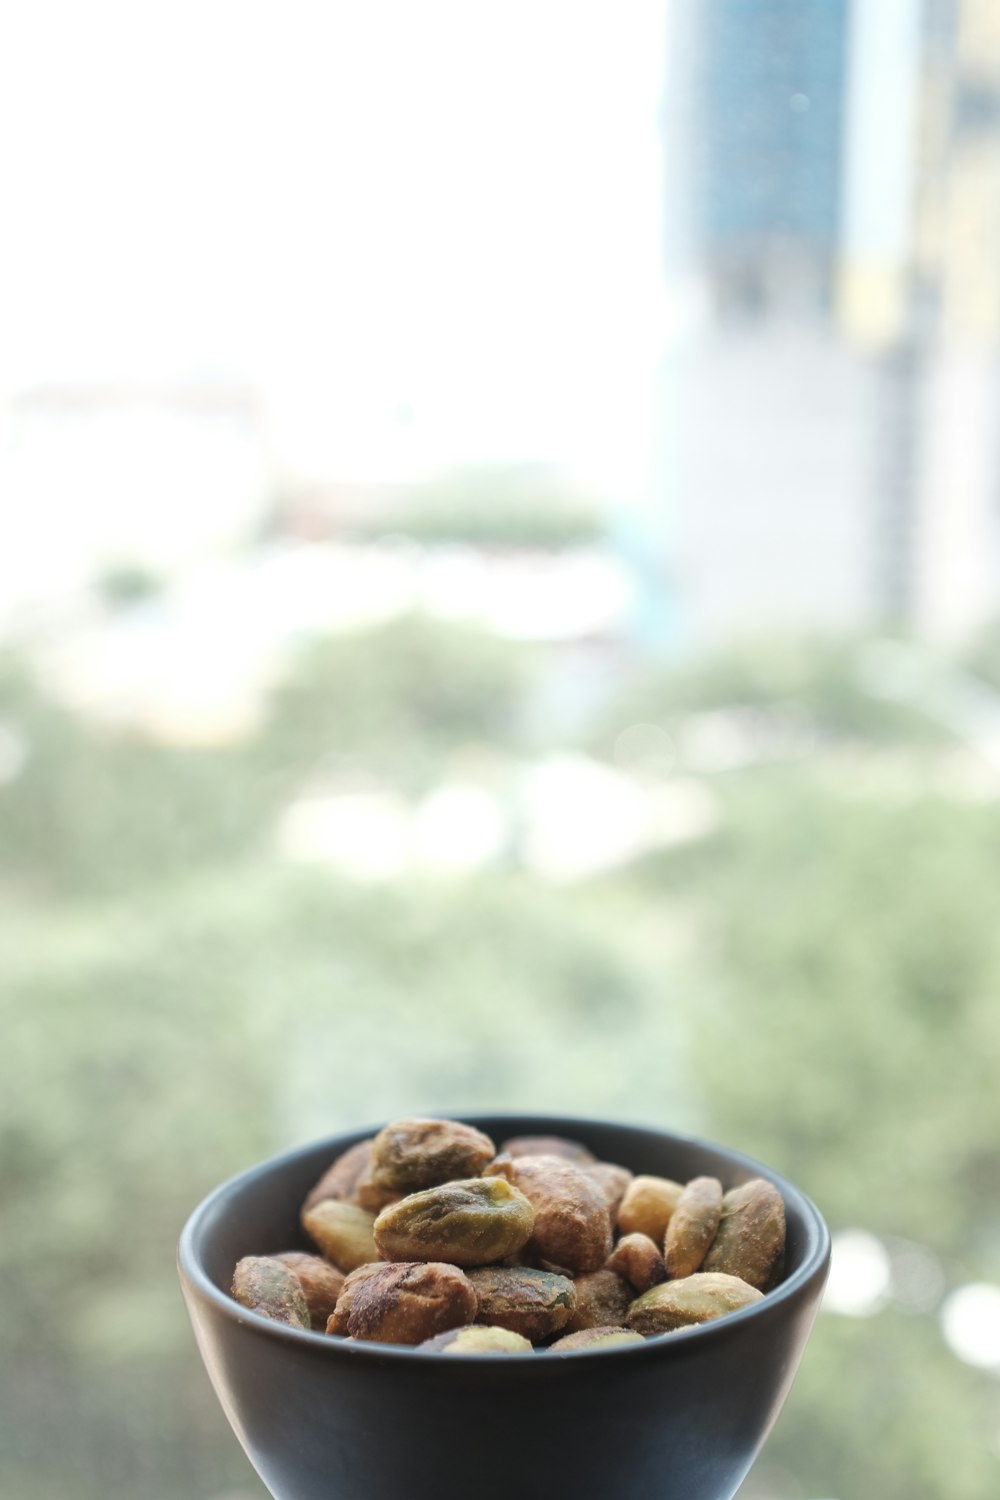 selective focus photography of nuts on black ceramic bowl